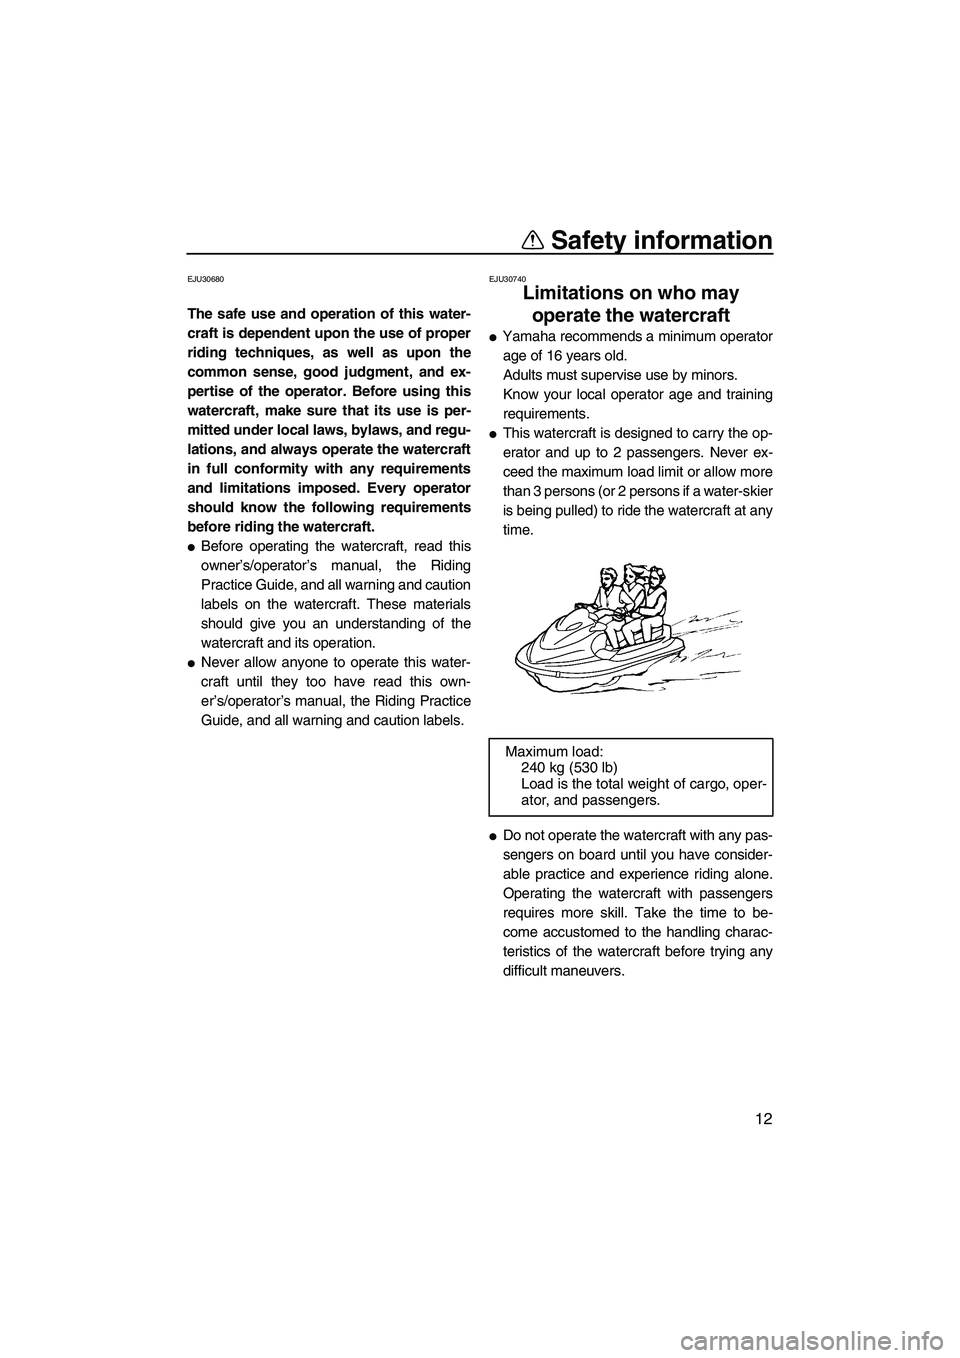 YAMAHA VX SPORT 2007  Owners Manual Safety information
12
EJU30680
The safe use and operation of this water-
craft is dependent upon the use of proper
riding techniques, as well as upon the
common sense, good judgment, and ex-
pertise o